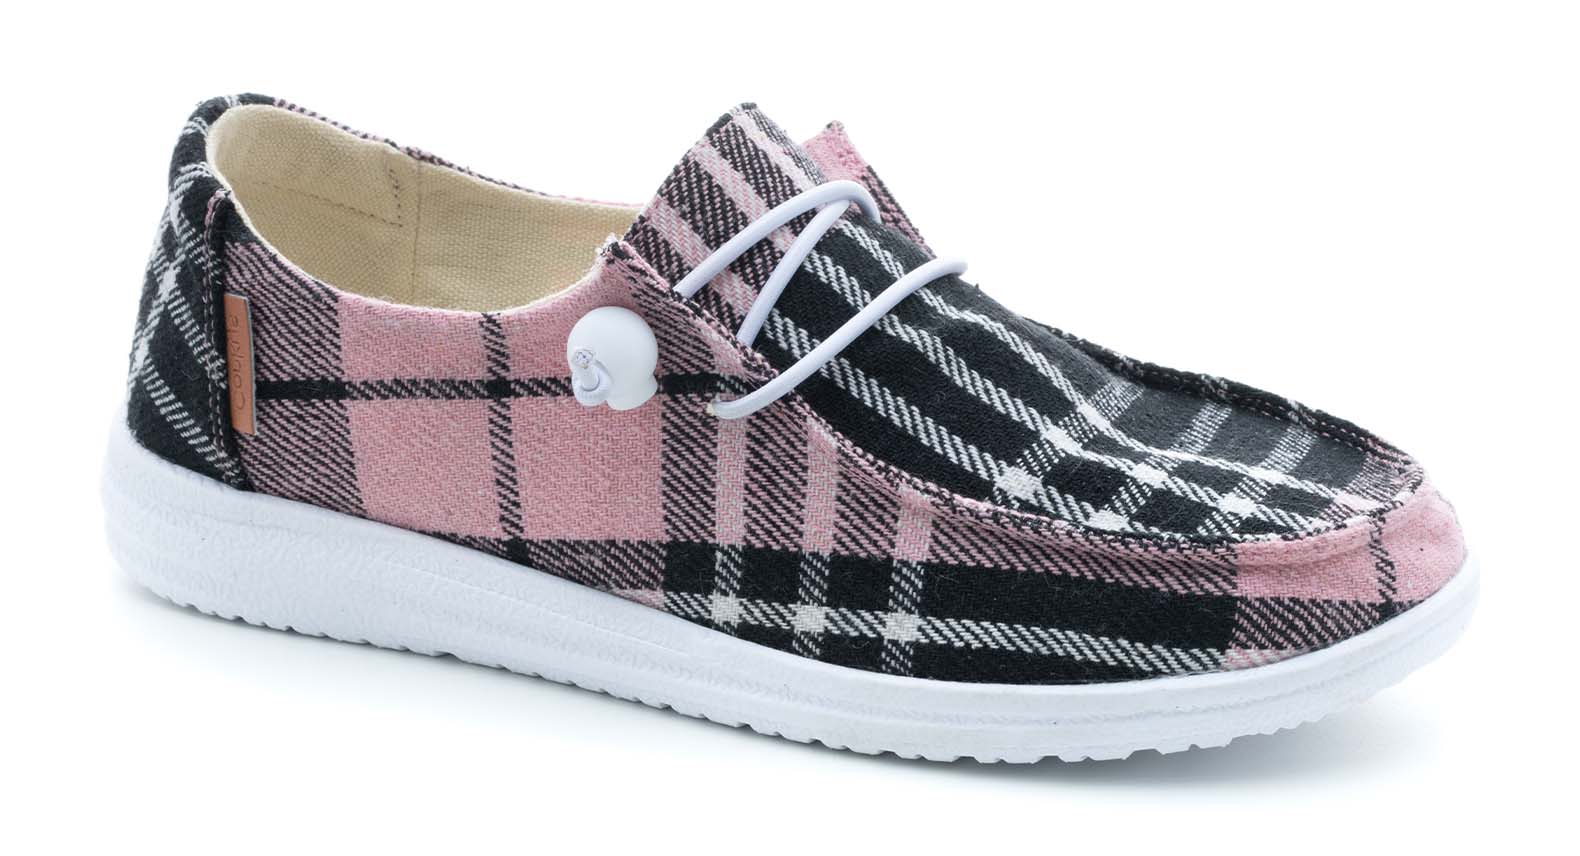 Corkys Shoes - Kayak Pink Flannel Slip On Sneakers  SALE 40% OFF NOW $19.95